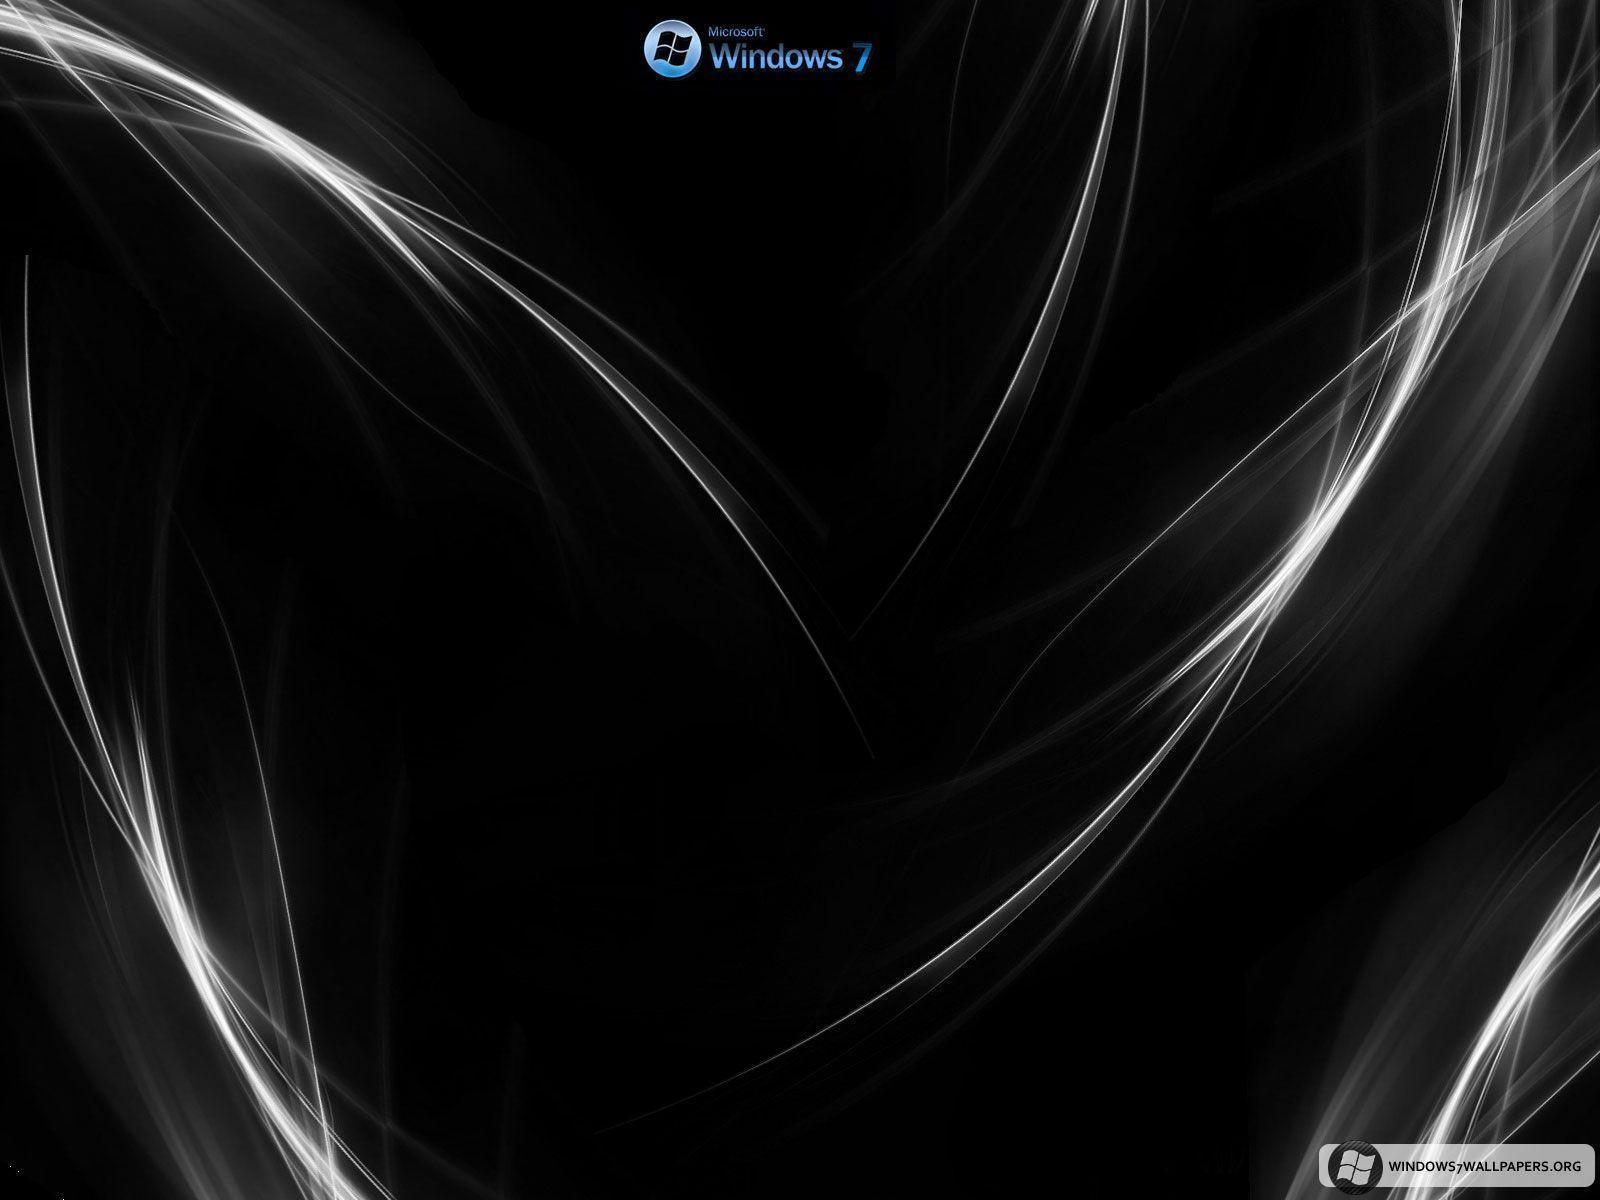 Wallpapers For > Windows 7 Backgrounds Hd Black